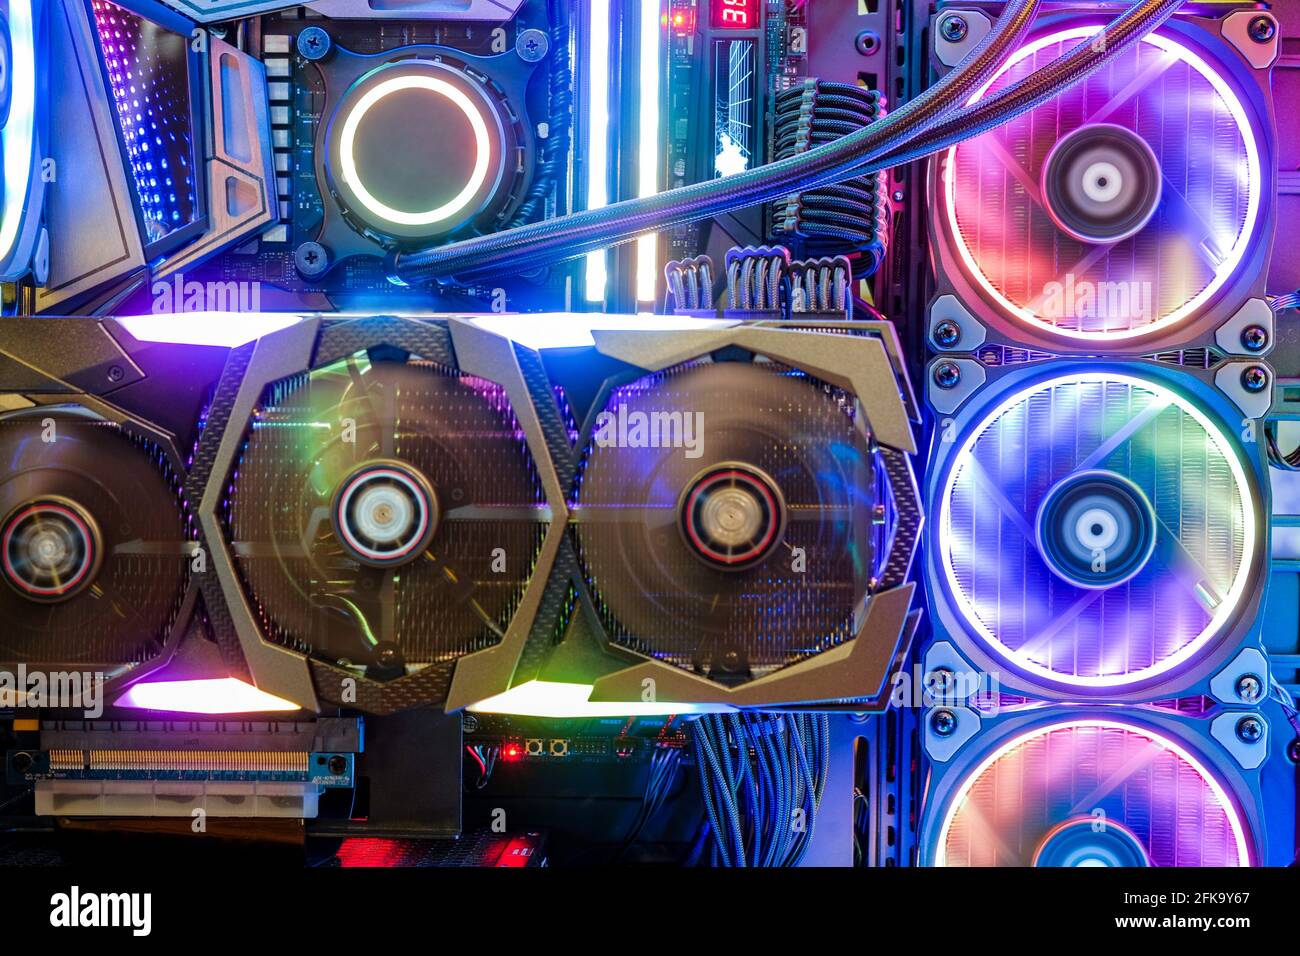 Computer With Internal Led Rgb Lights And Cpu Cooling Fans Hardware Inside  Open High Performance Desktop Pc Stock Photo - Download Image Now - iStock